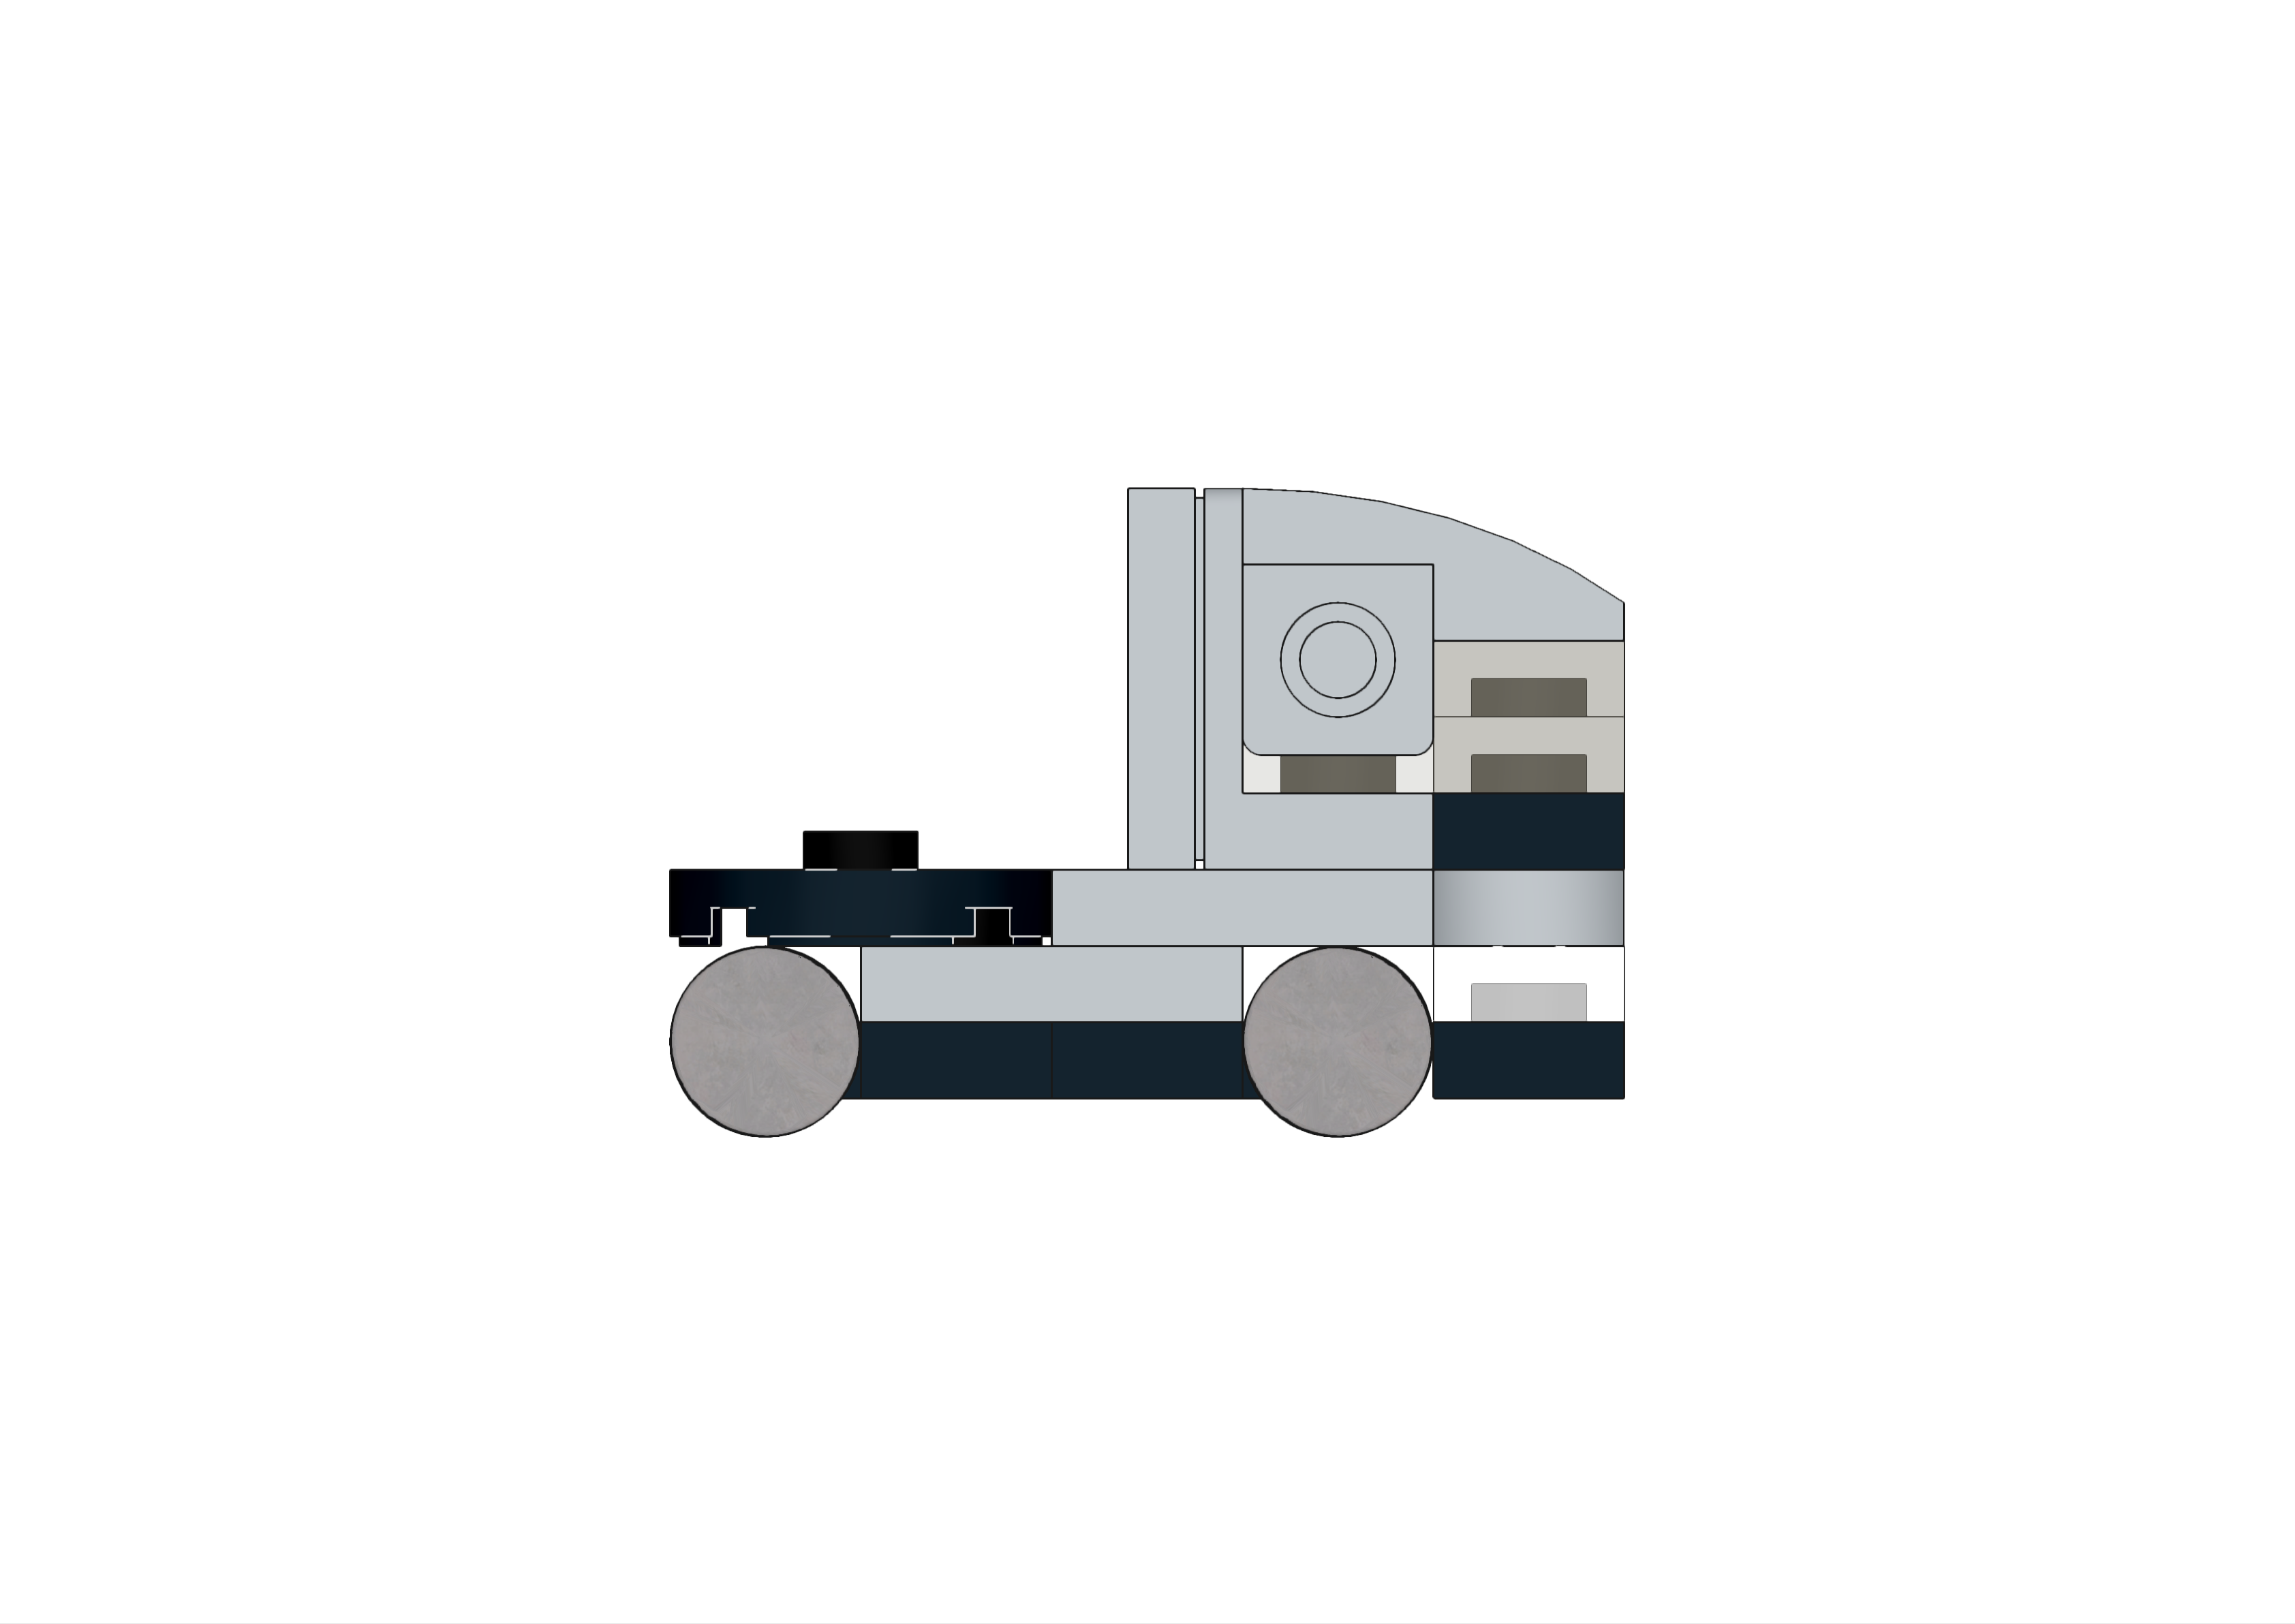 Alternate side view image of the LEGO Micro Volvo FH Truck MOC.